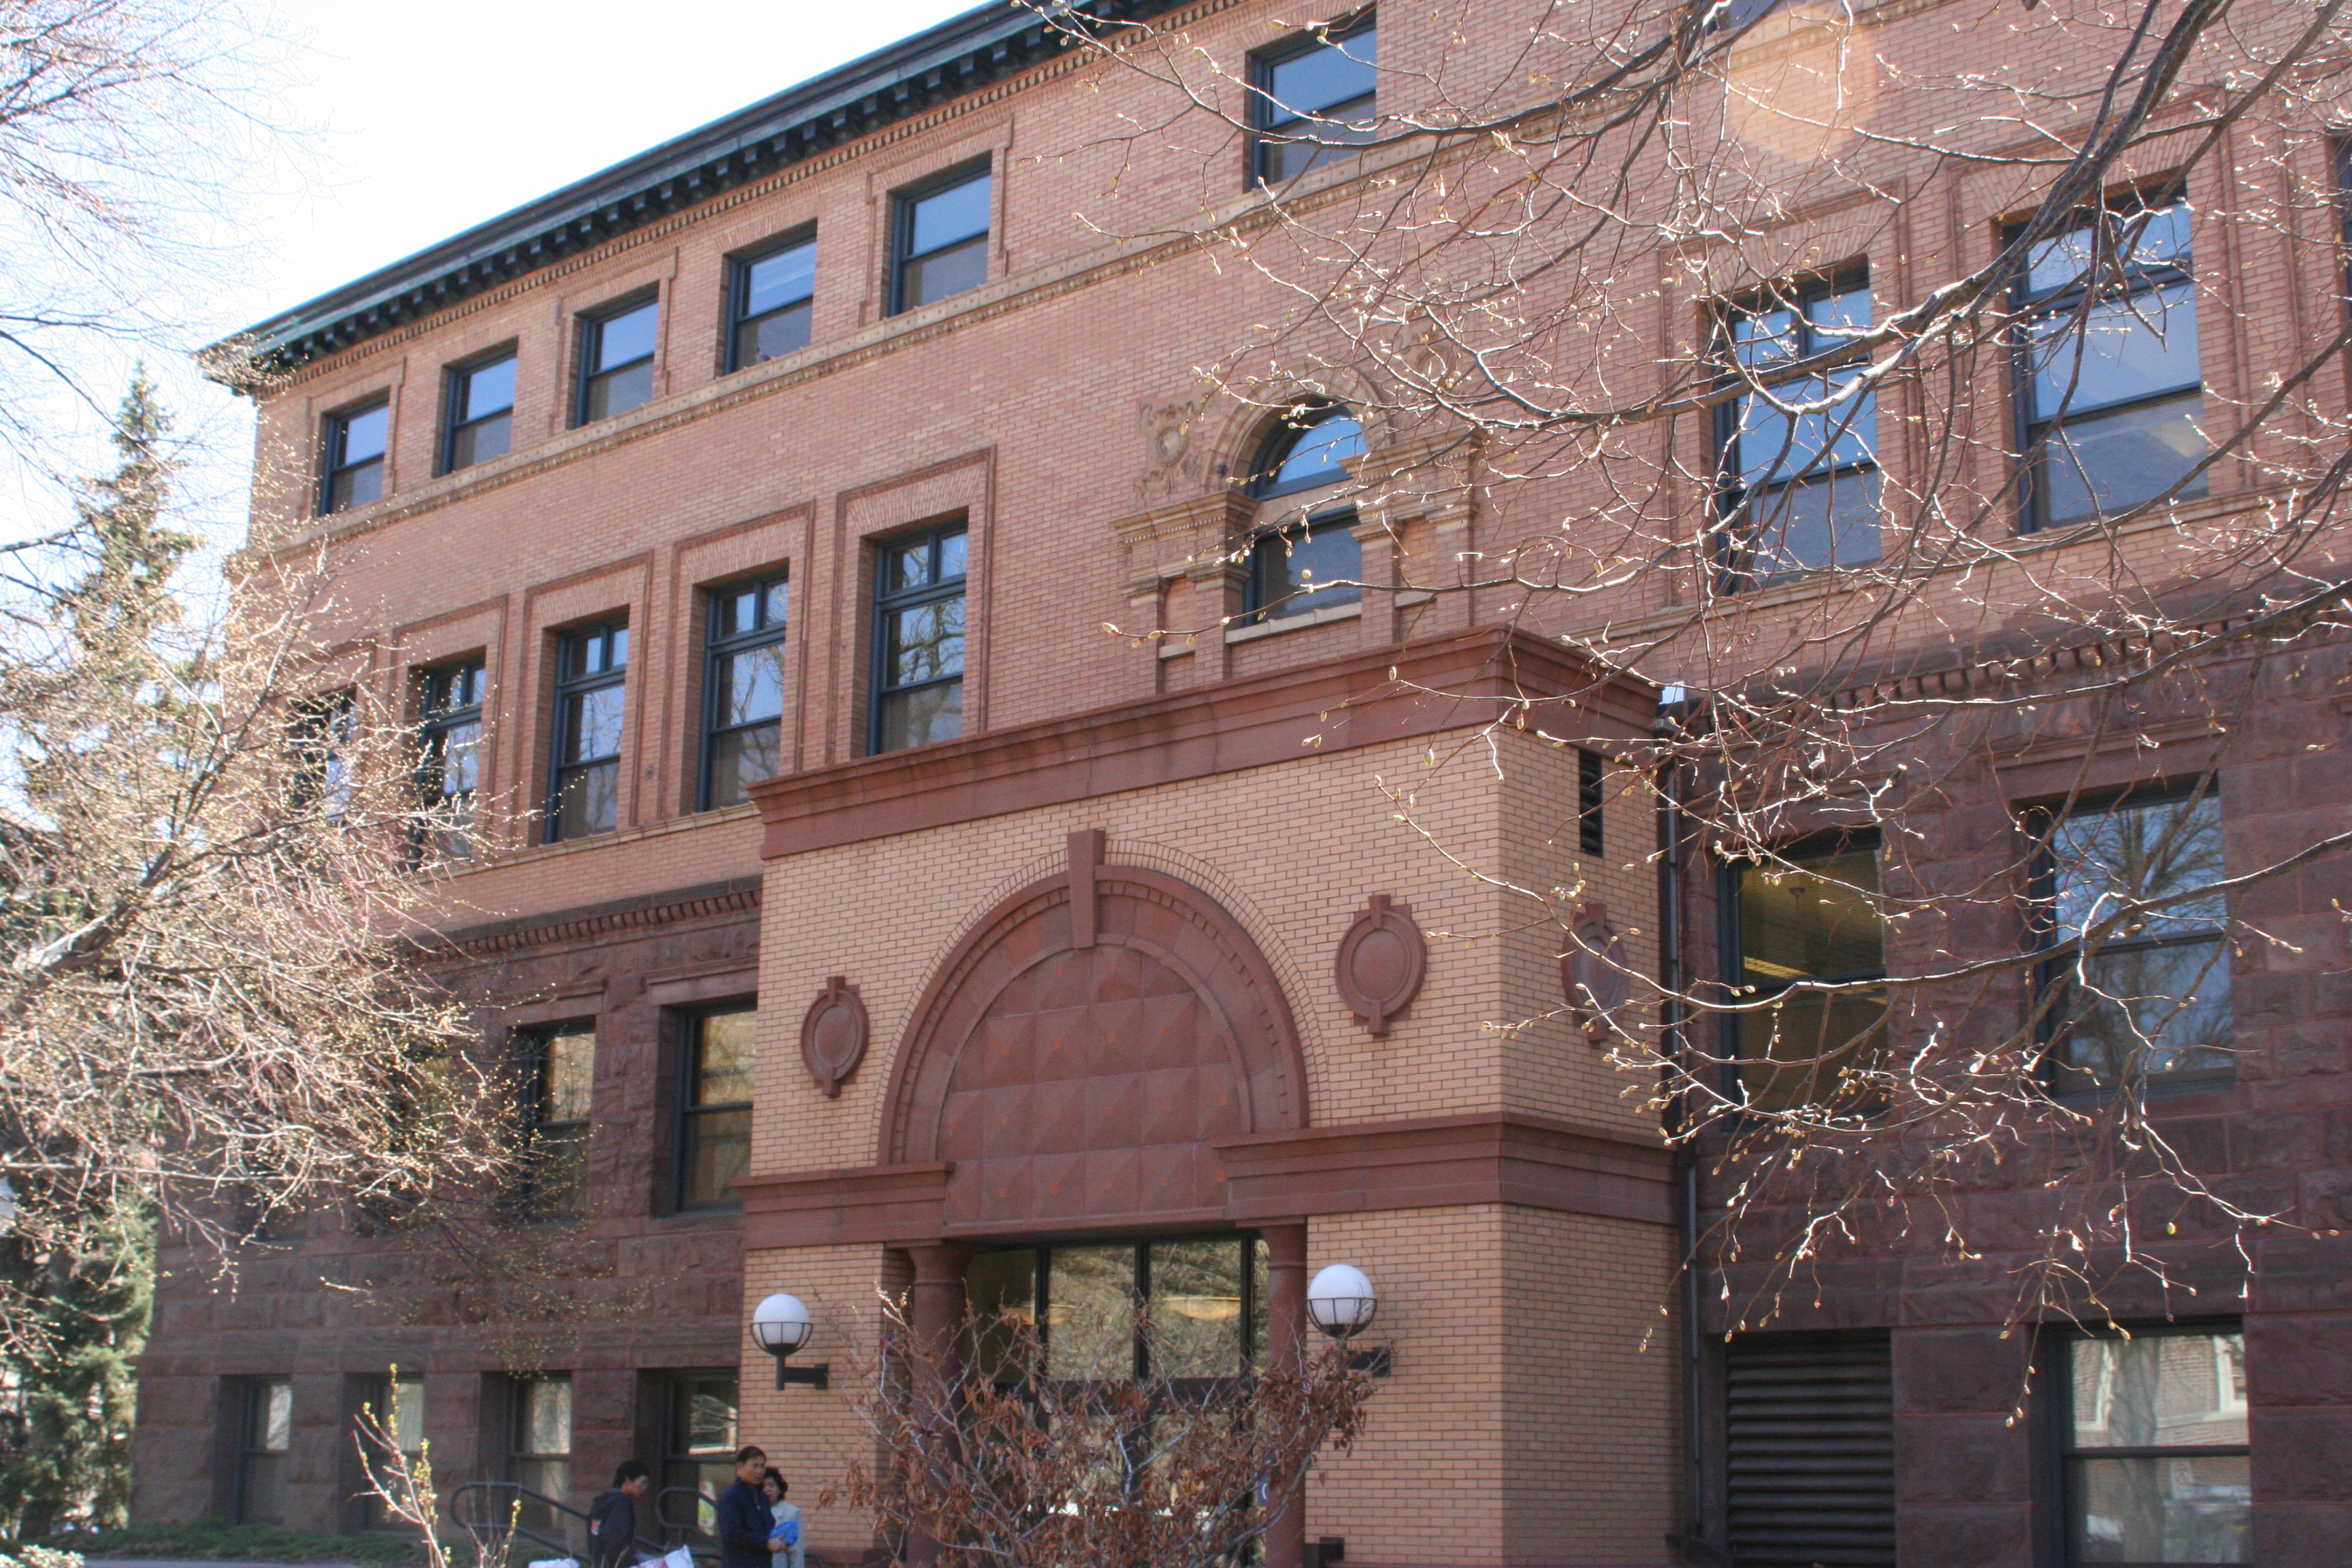 Wulling Hall was designed by Allen H. Stem and completed in 1892 